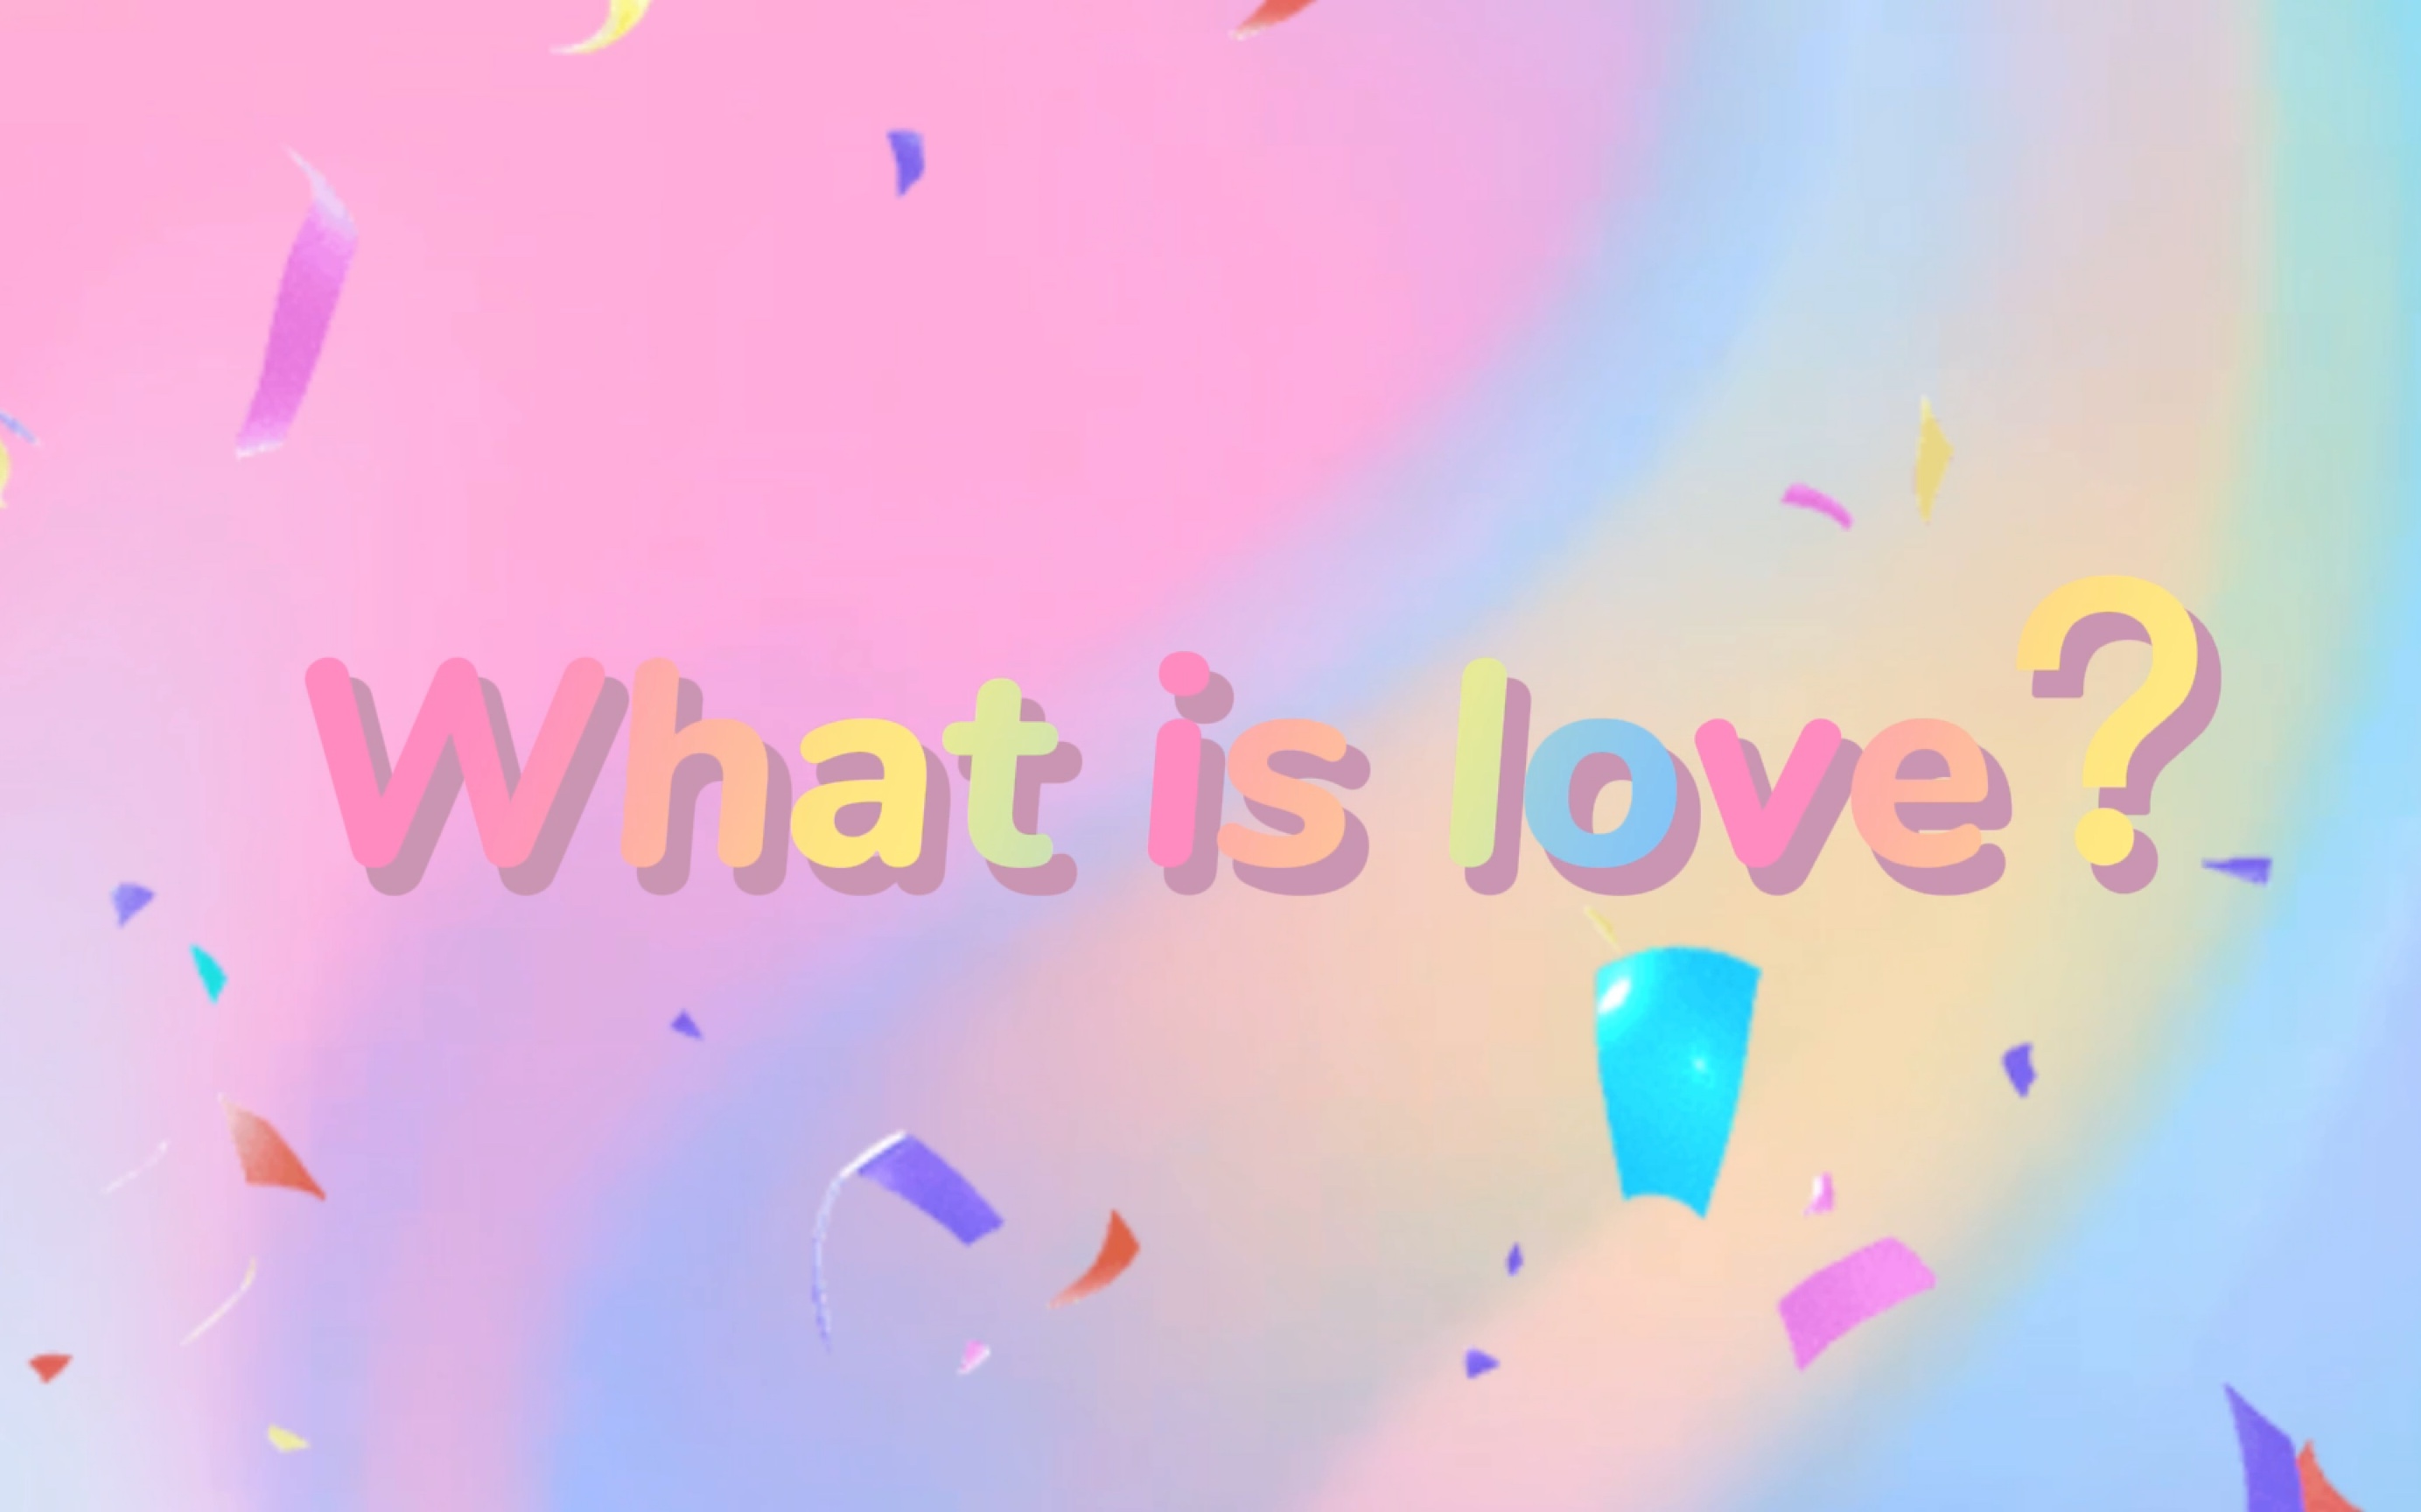 what is love背景视频（自剪自用）